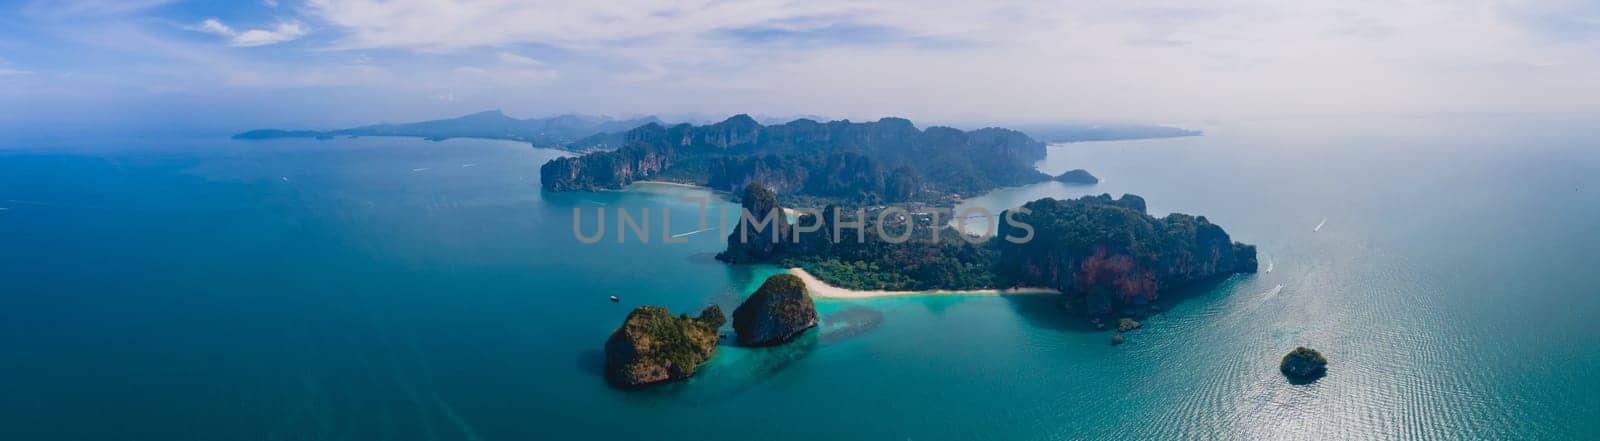 Railay Beach Krabi Thailand, the tropical beach of Railay Krabi, view from a drone of idyllic Railay Beach in Thailand in the evening at susnet with a cloudy sky